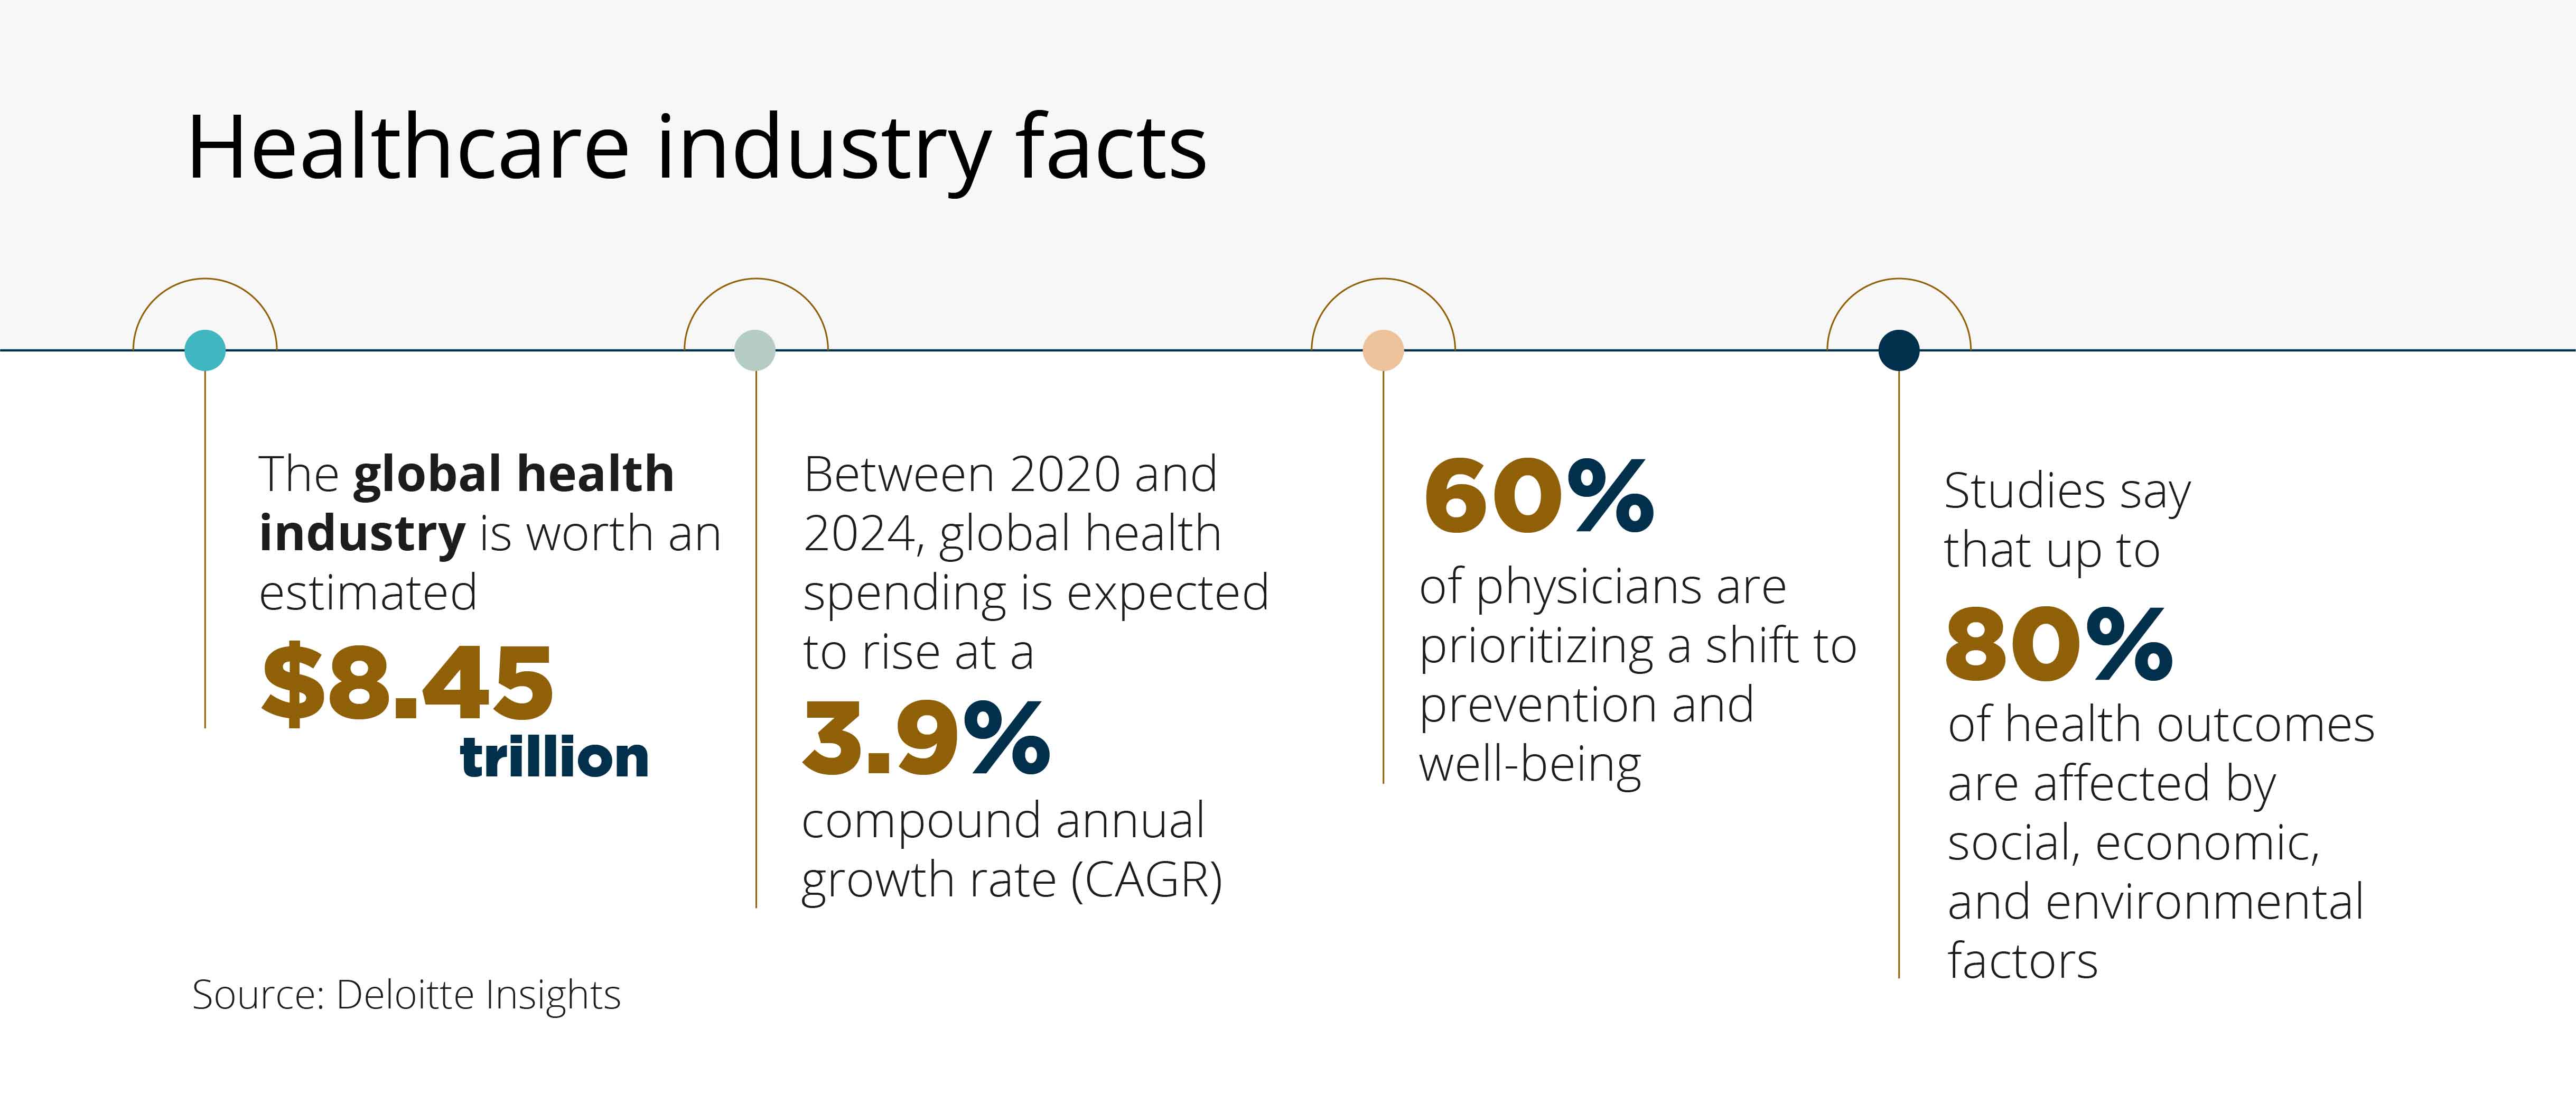 Health care industry facts